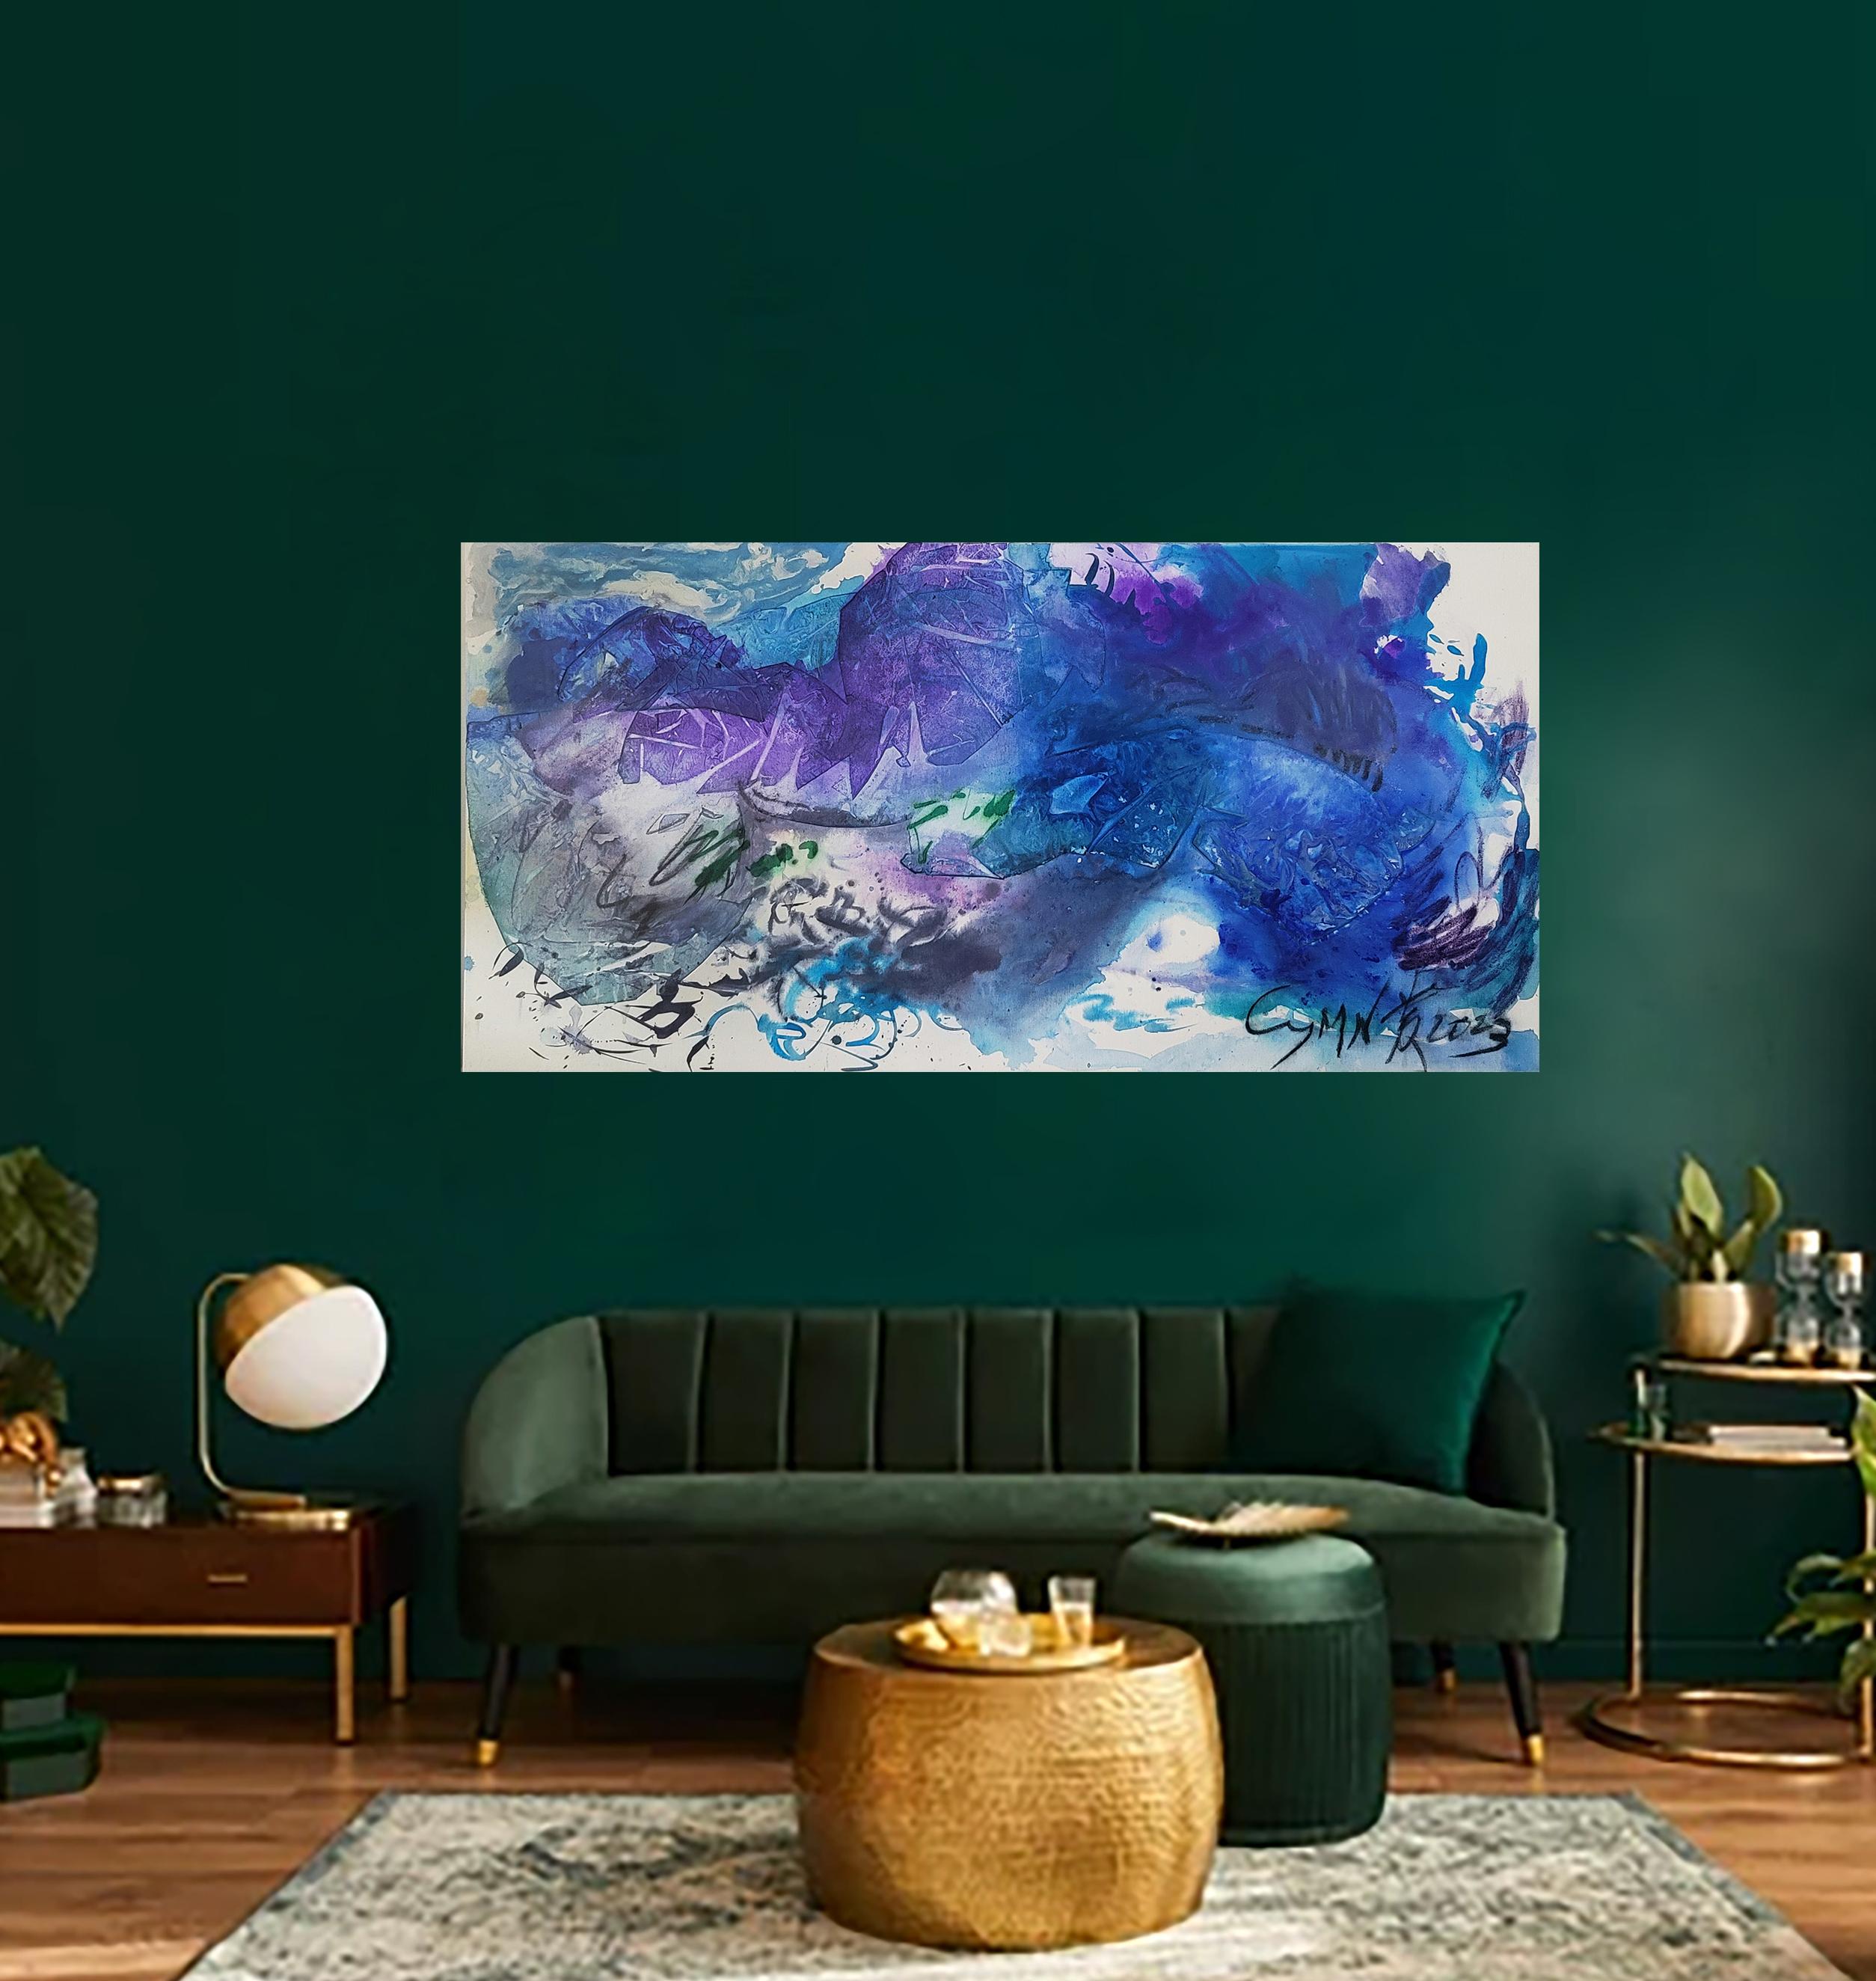 Resilience in Solitude - Energetic, Expressive Abstract, Zen Calligraphy - Abstract Expressionist Painting by Cymn Wong 